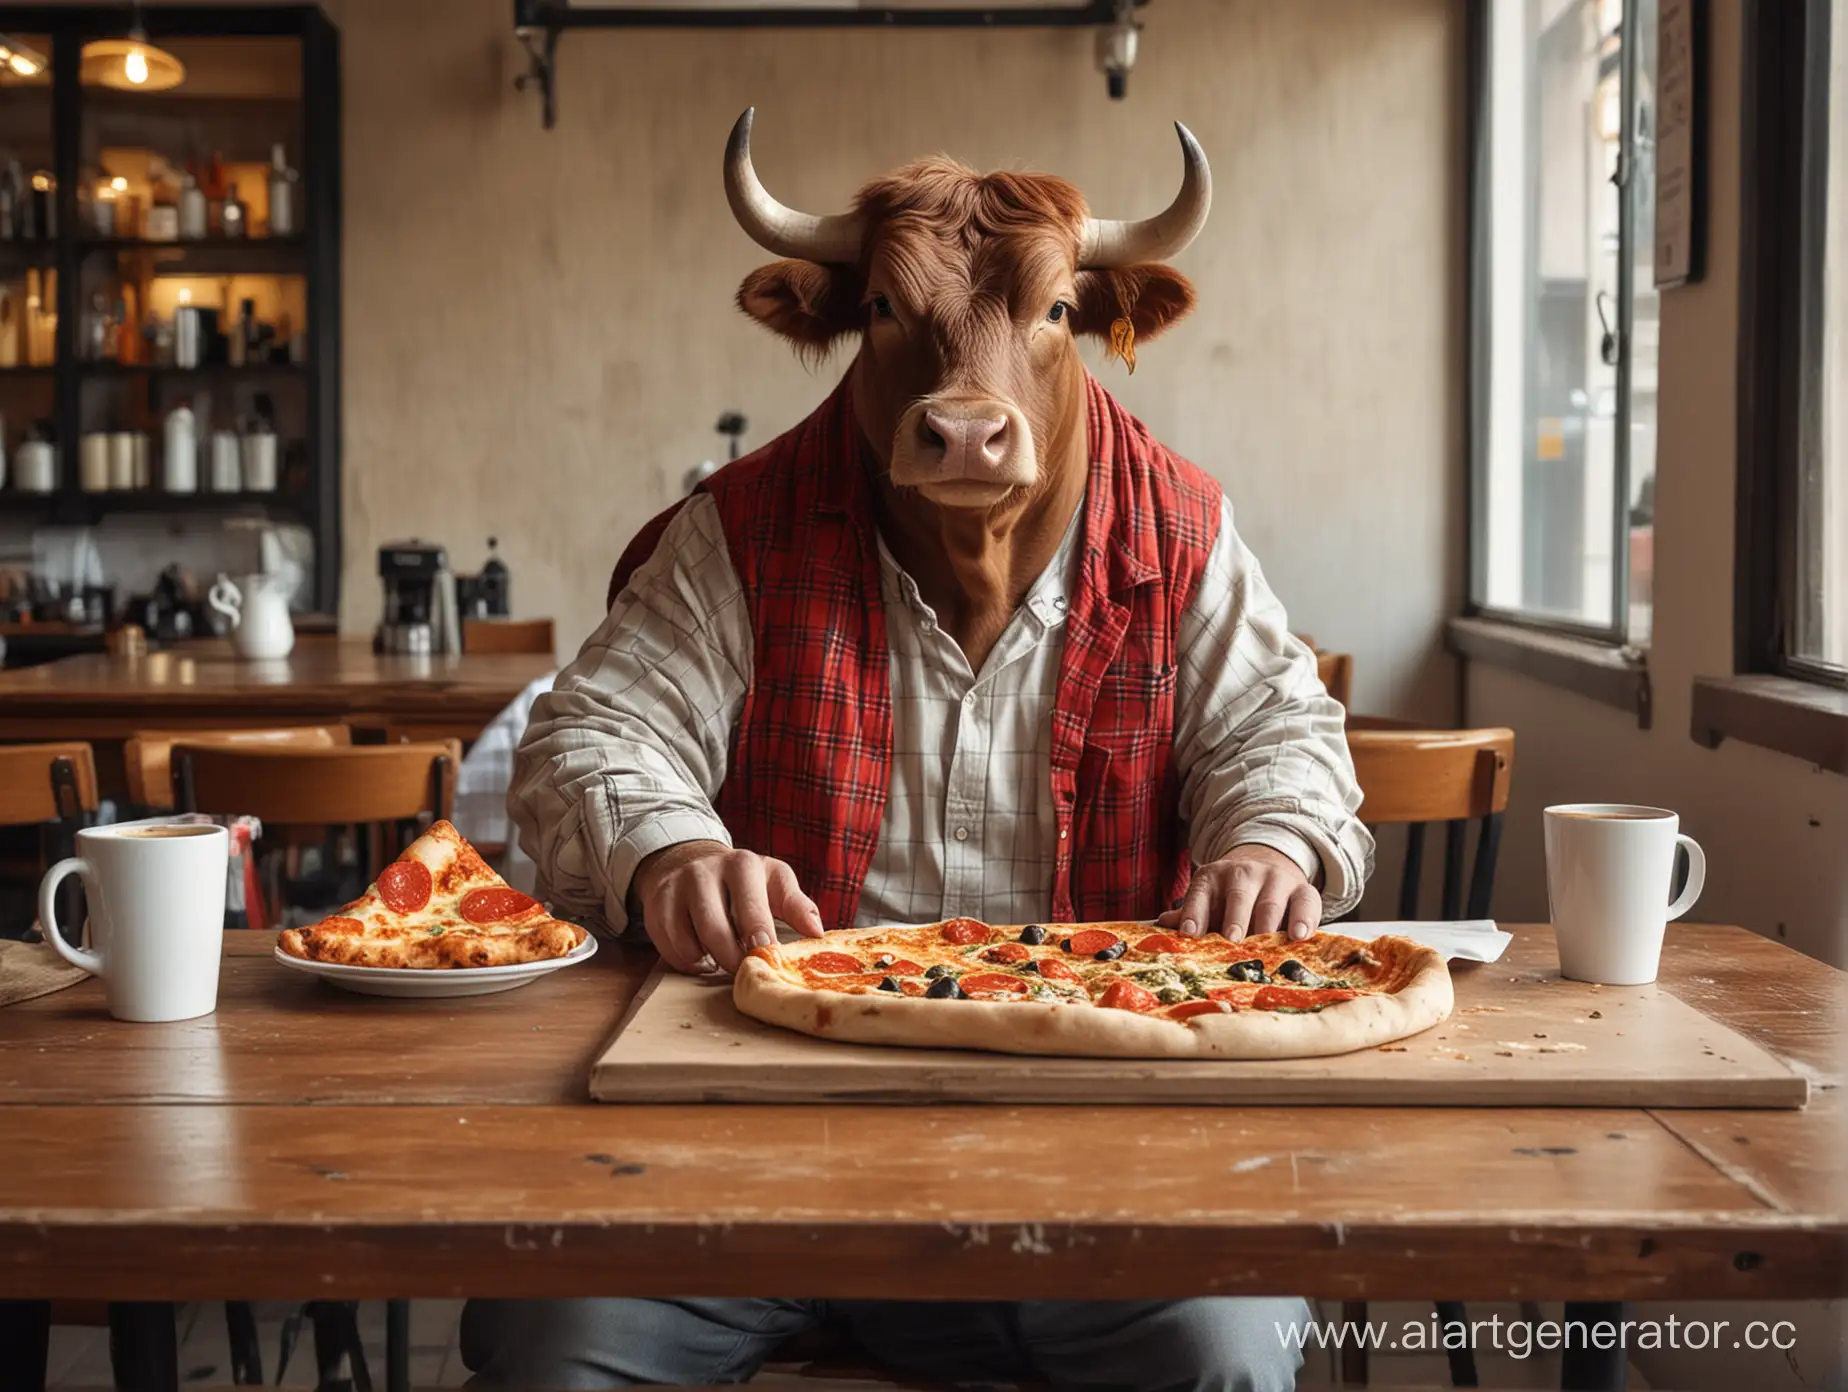 Bull-Dining-in-Casual-Attire-with-Pizza-in-Caf-Setting